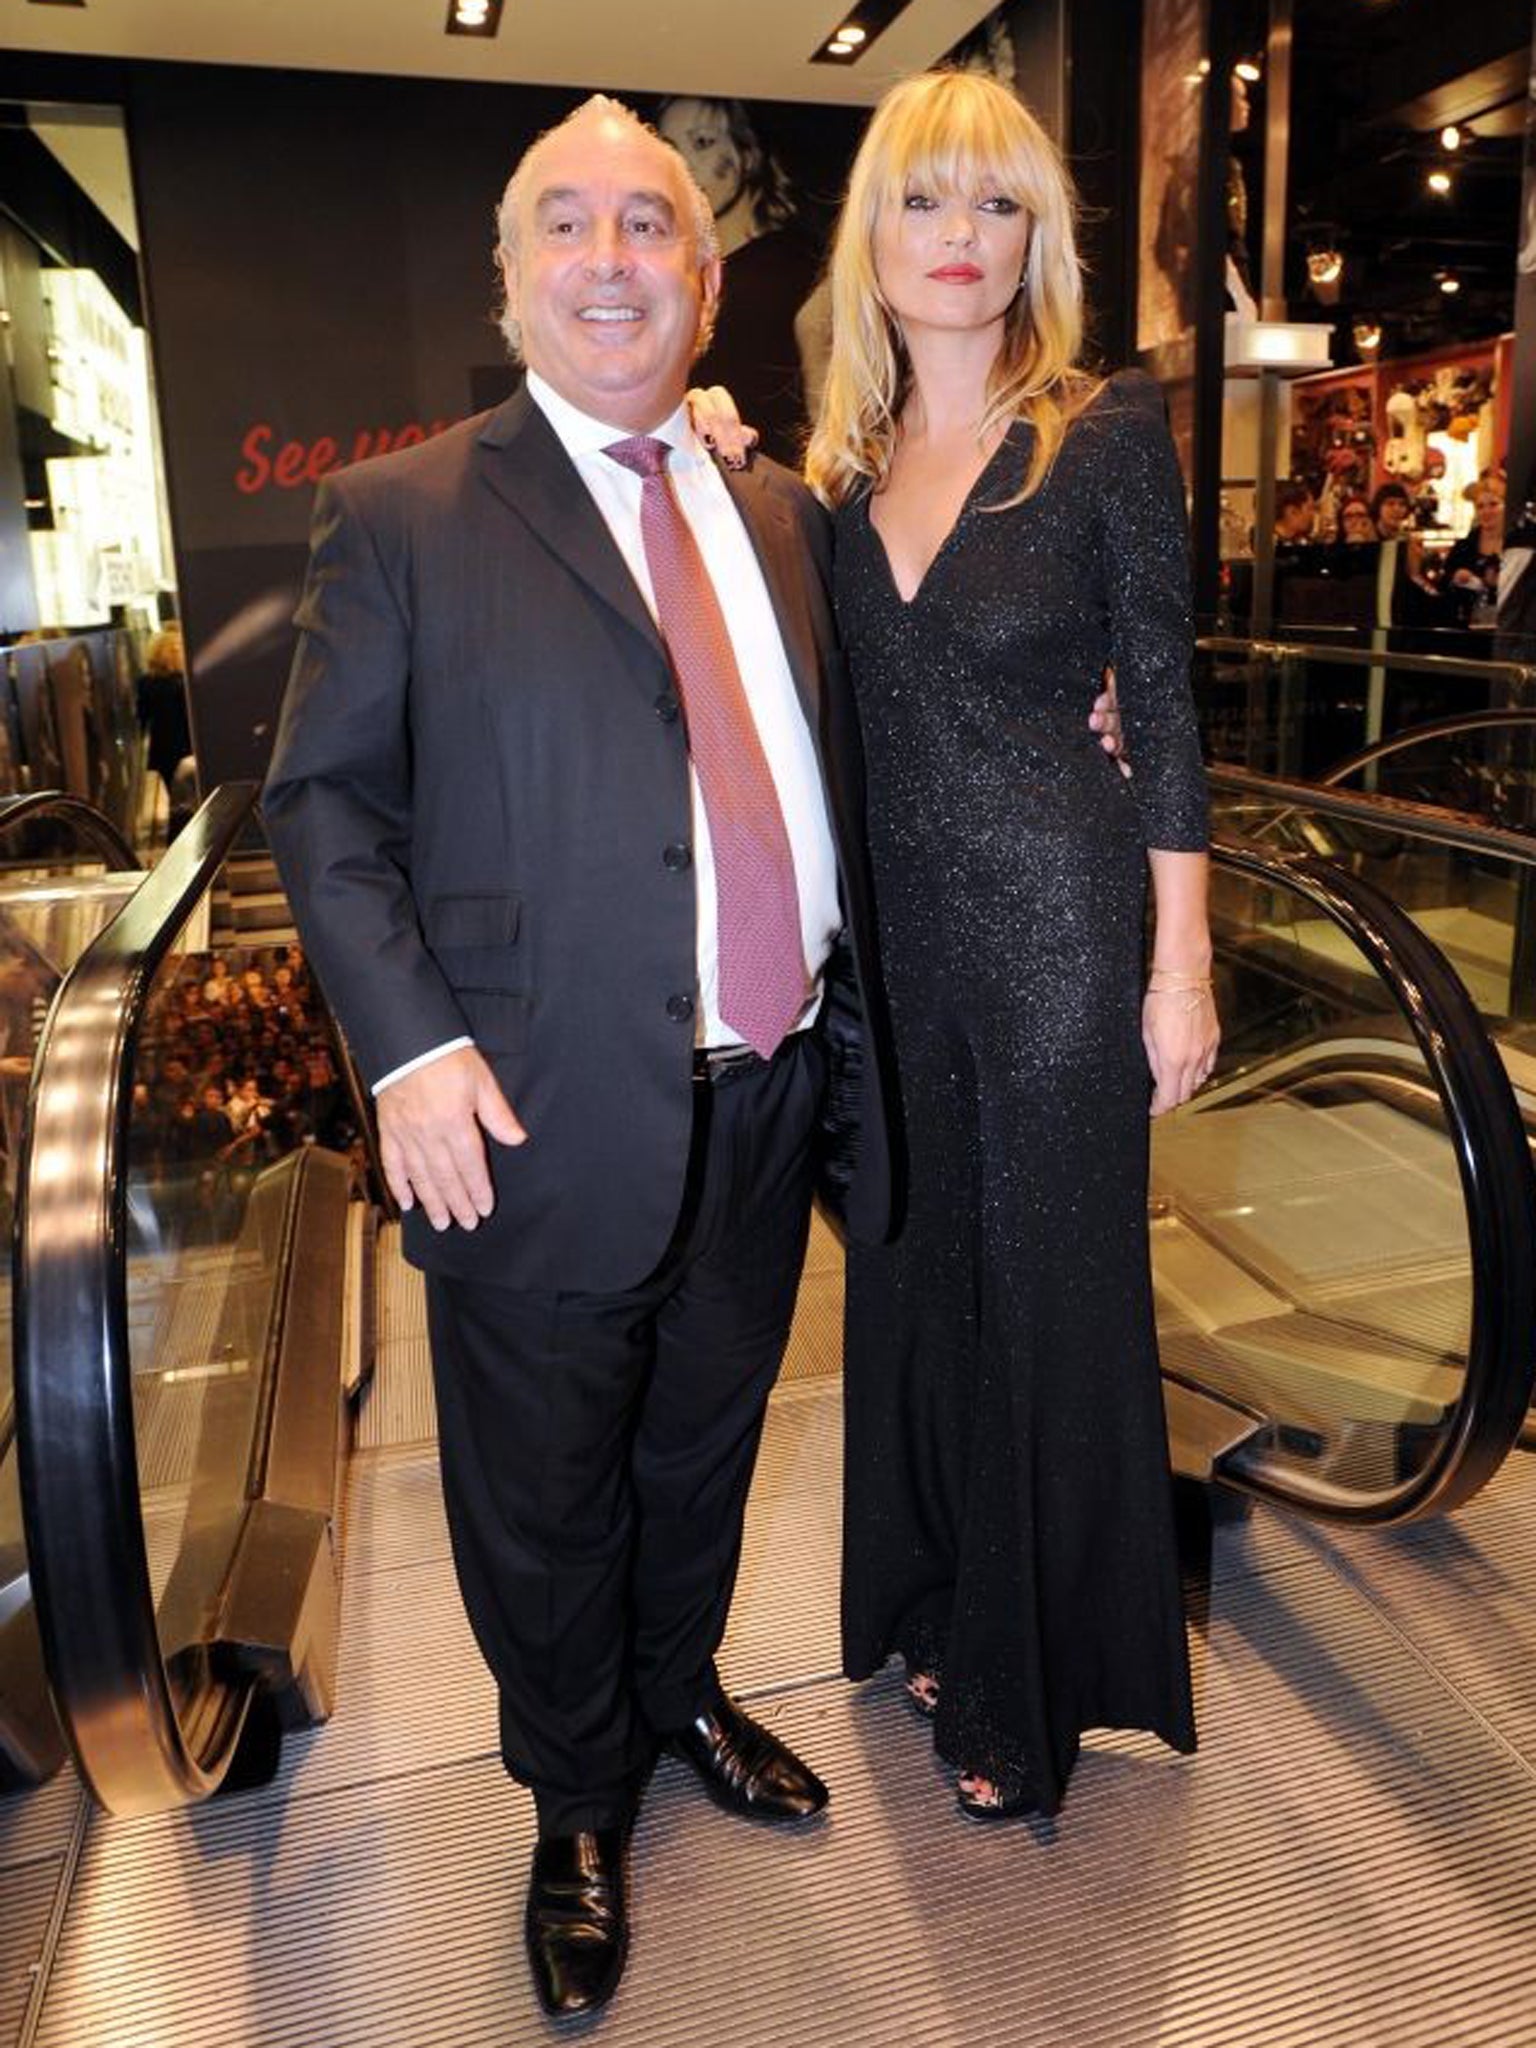 Topshop and Topman were today valued at a staggering £2 billion after retail tycoon Sir Philip Green sold a 25% stake in the fashion brands